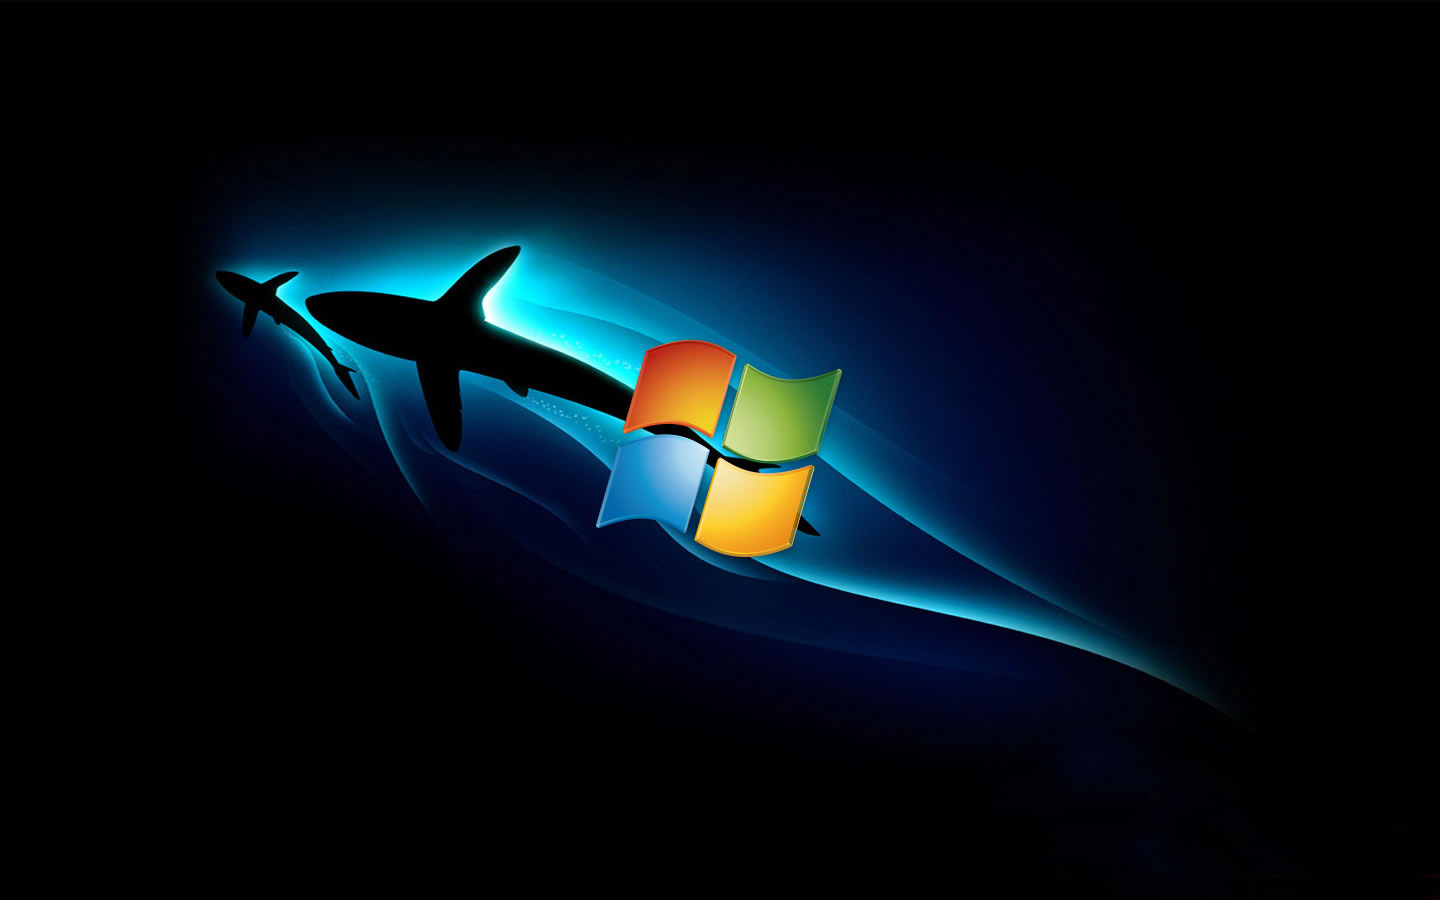 Windows 8 HD Beautiful Wallpapers Download Here D i g g I m a 1440x900